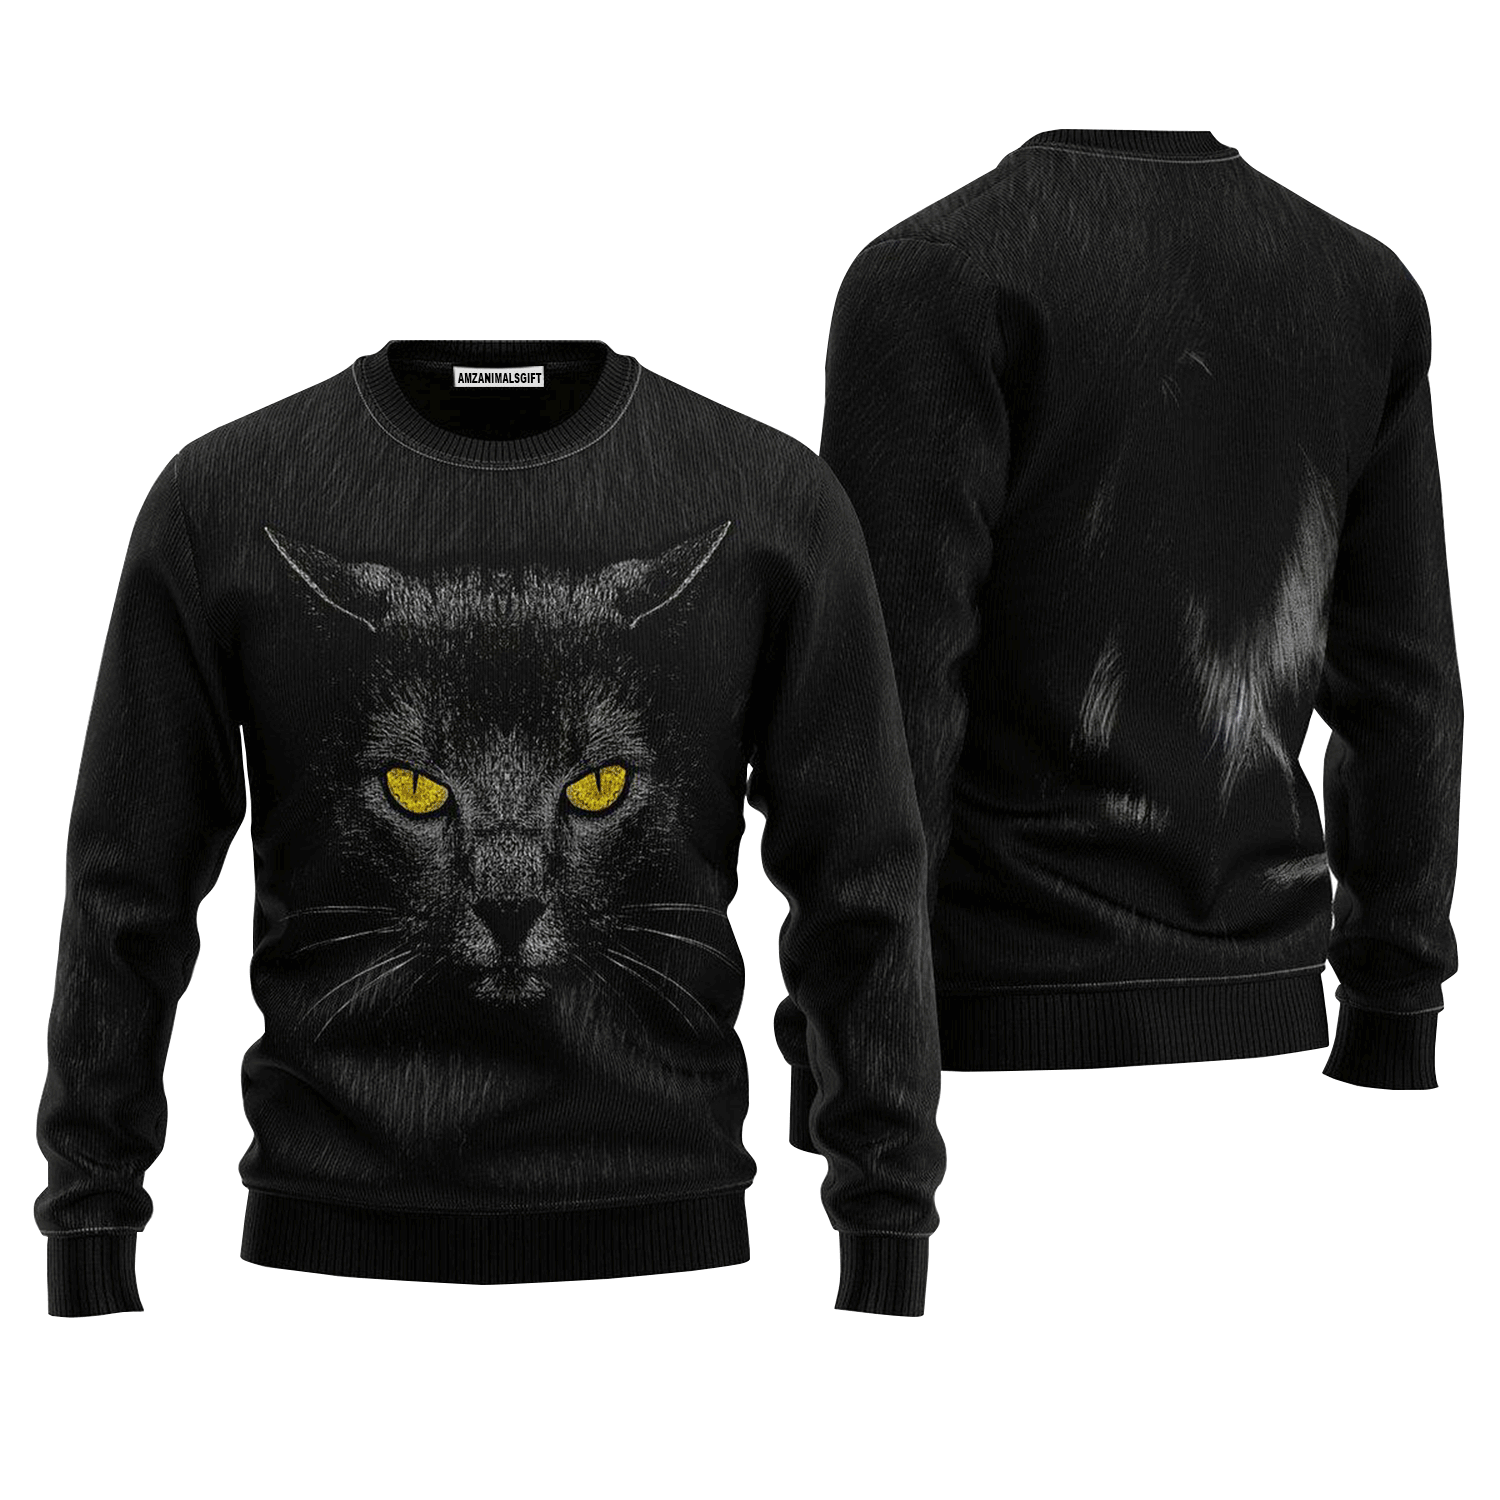 Cool Black Cat Sweater, Ugly Christmas Sweater For Men & Women, Perfect Outfit For Christmas New Year Autumn Winter